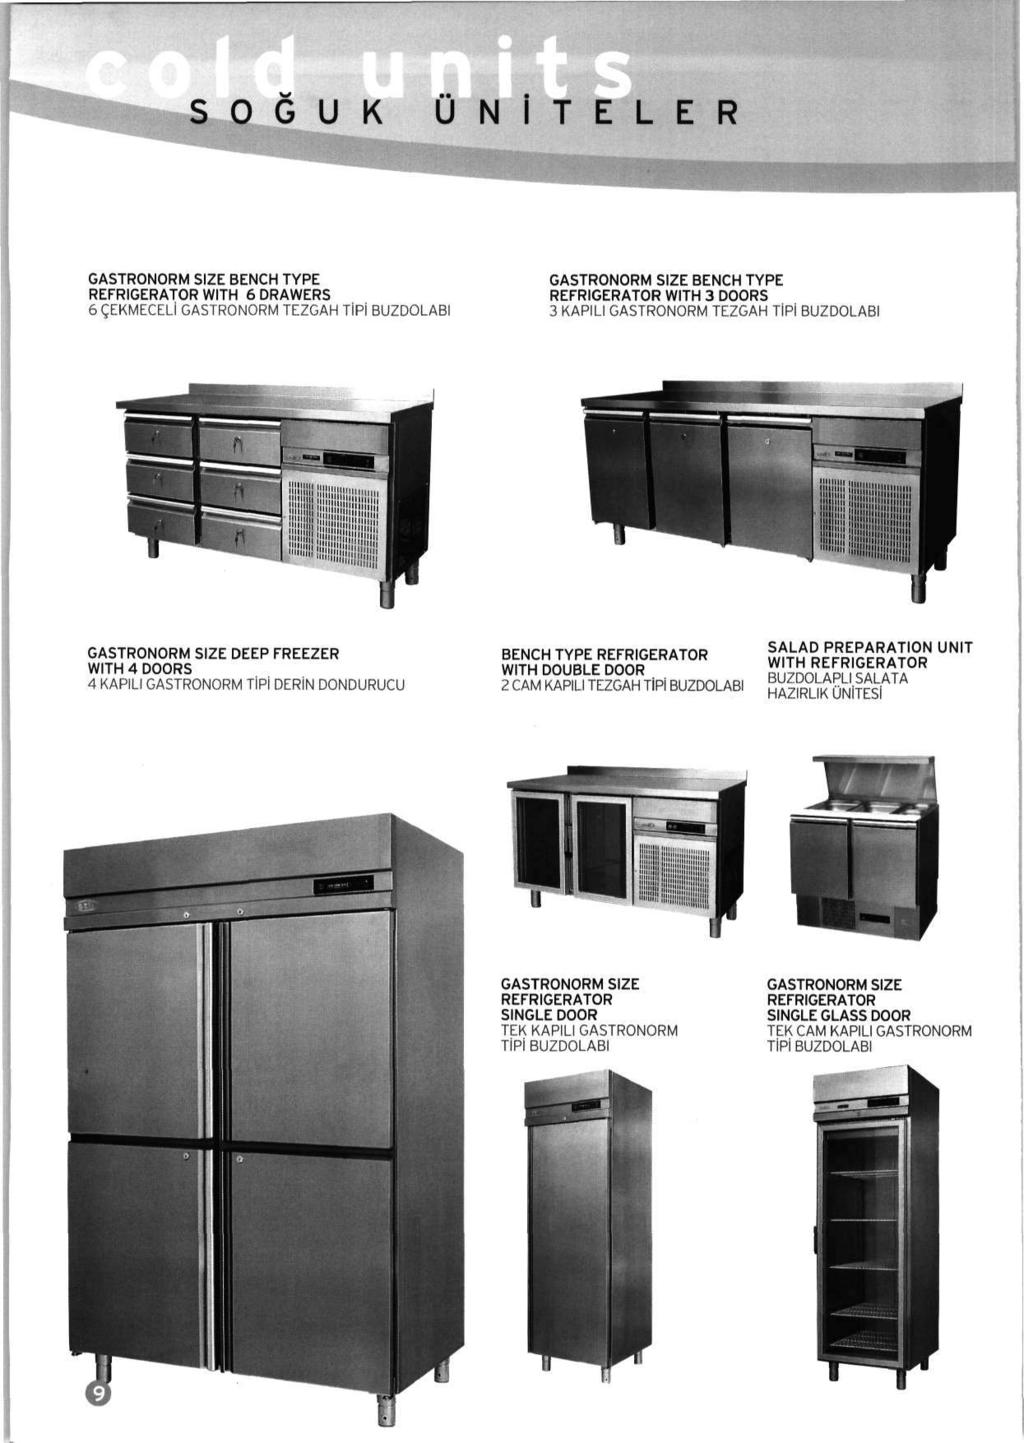 U N I T E L E R GASTRONORM SIZE BENCH TYPE REFRIGERATOR WITH 6 DRAWERS 6 gekmeceli GASTRONORM TEZGAH TiPi BUZDOLABI GASTRONORM SIZE BENCH TYPE REFRIGERATOR WITH 3 DOORS 3 KAPILI GASTRONORM TEZGAH